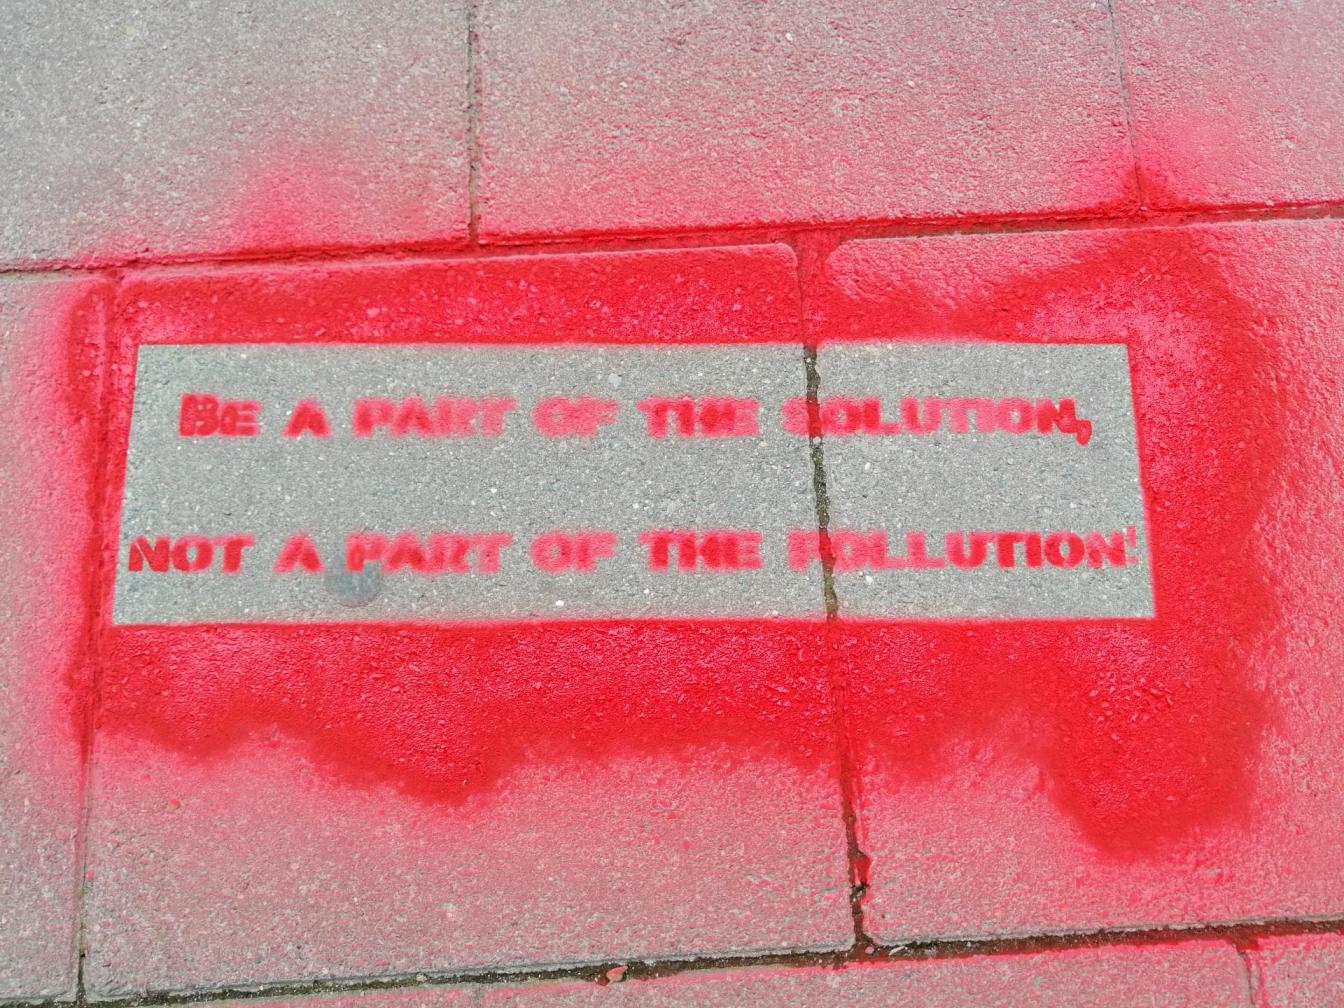 Slogan 'Be part of the solution, not a part of the pollution'